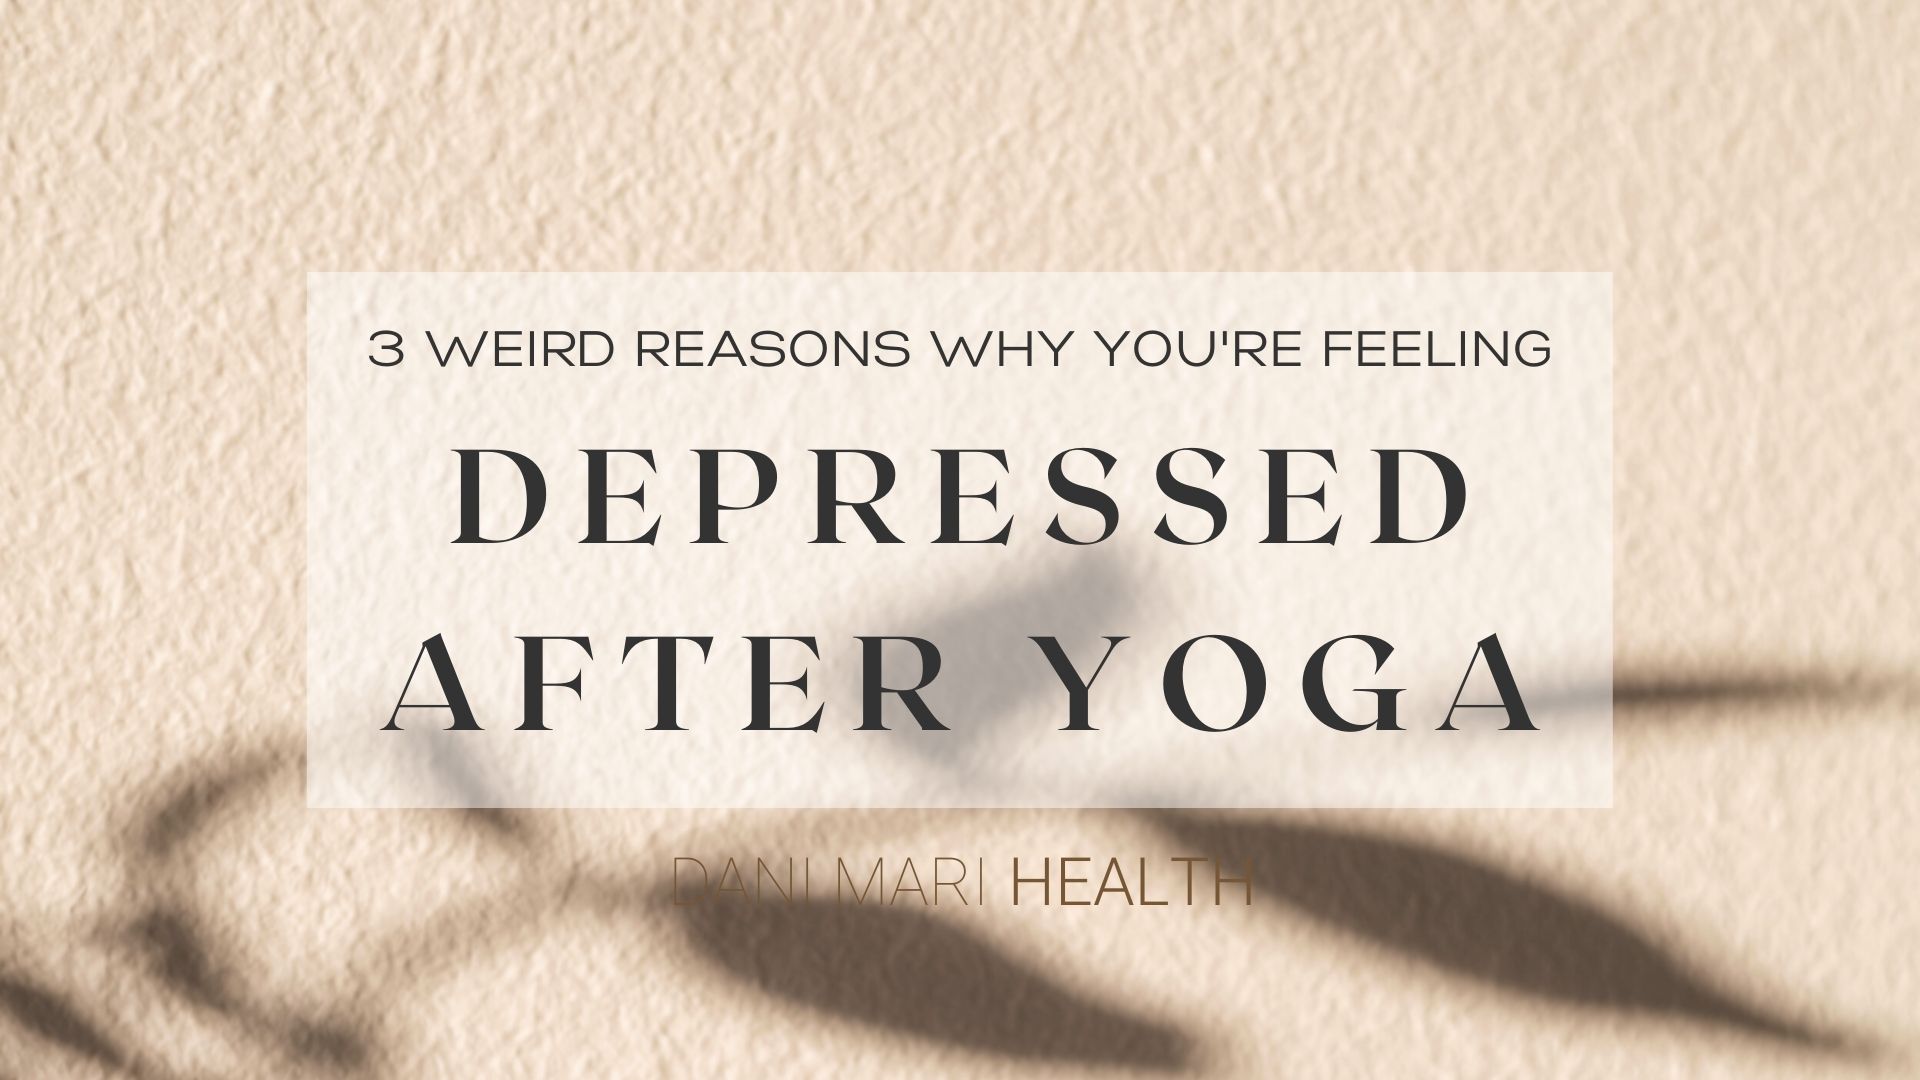 3 weird reasons why you're feeling depressed after yoga intuitive eating dani schenone dani mari health intuitive eating counselor certified intuitive eating counselor yoga registered yoga teacher certified personal trainer fitness yoga health wellness